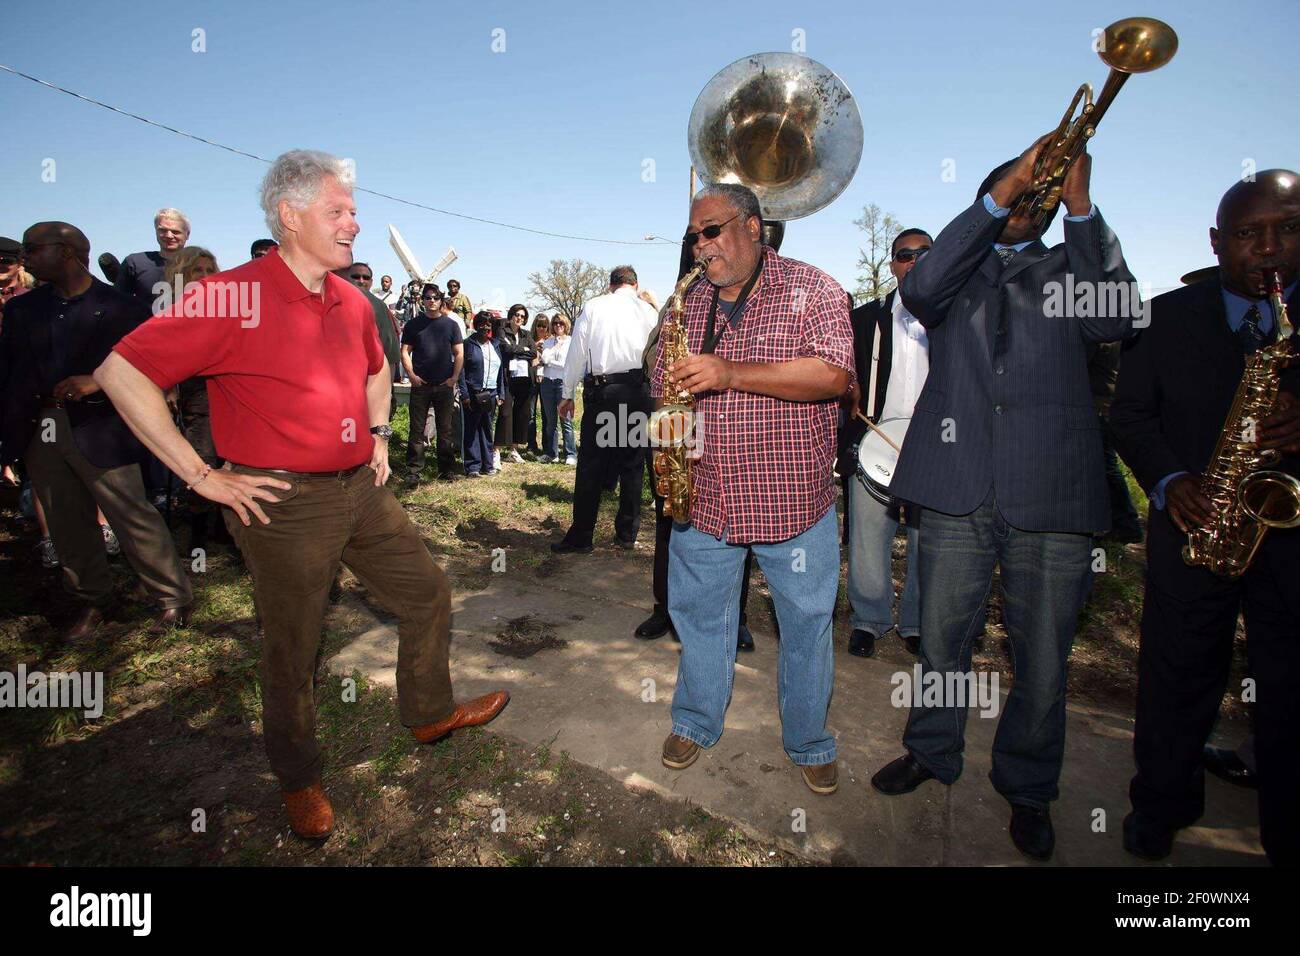 16 March 2008 - New Orleans, Louisiana, Lower 9th ward - Former President Bill Clinton talks saxophones and enjoys a rousing performance by the Lucky 8 Brass Band before he leaves the area. Clinton was in town for the 'Make a Difference, Make a Commitment' clean up of the neighbourhood devastated by Hurricane Katrina. The massive clean up project was organised by Brad Pitt's Make it Right Foundation aided by the Clinton Global Initiative. Photo Credit: Charlie Varley/Sipa Press/pittclintonone.028/0803171350 Stock Photo